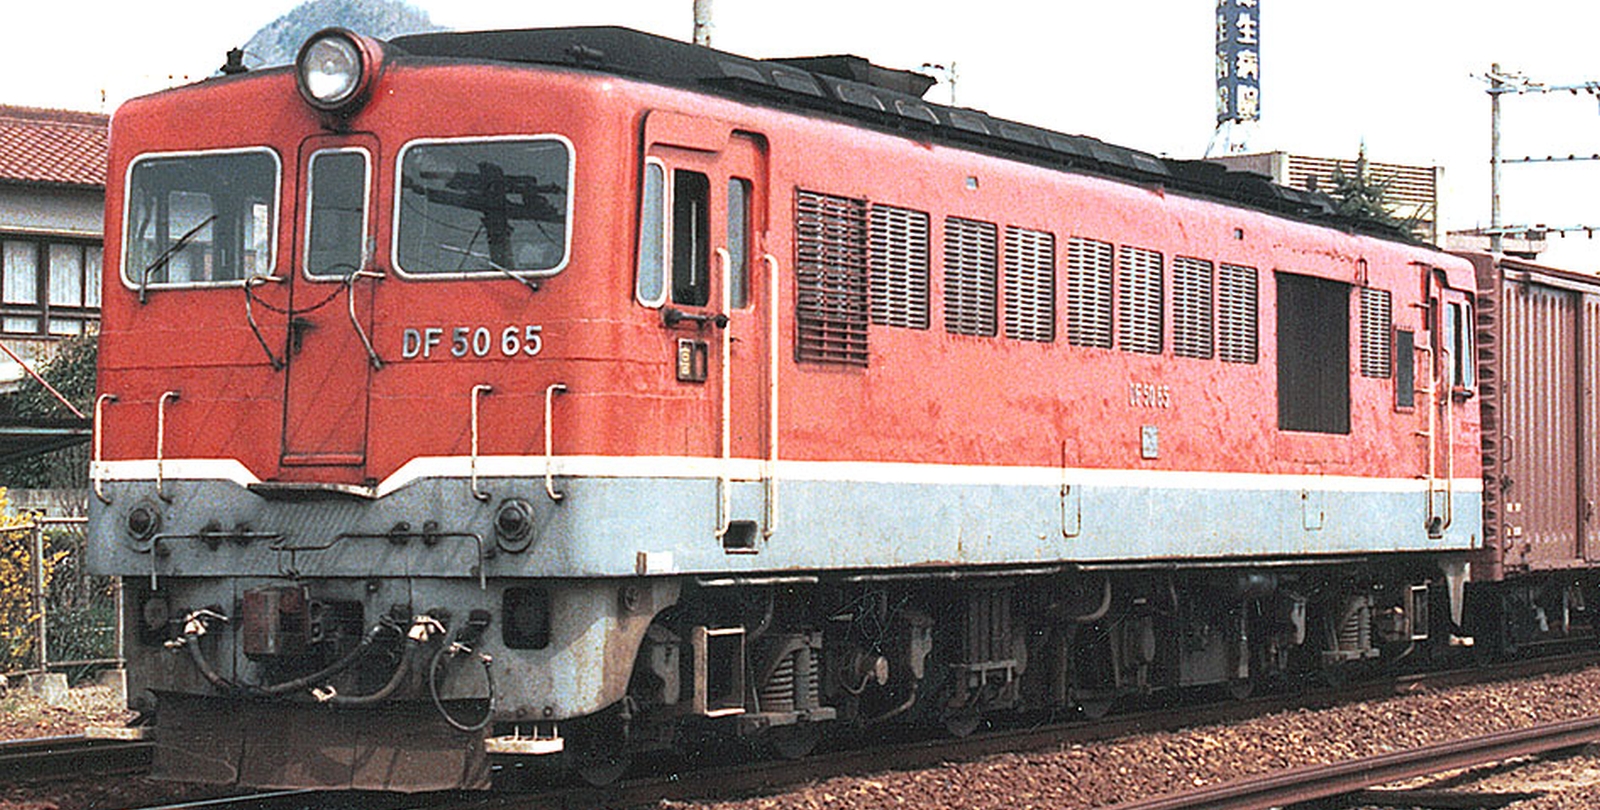 DF50 65 in 1982 in front of a freight train